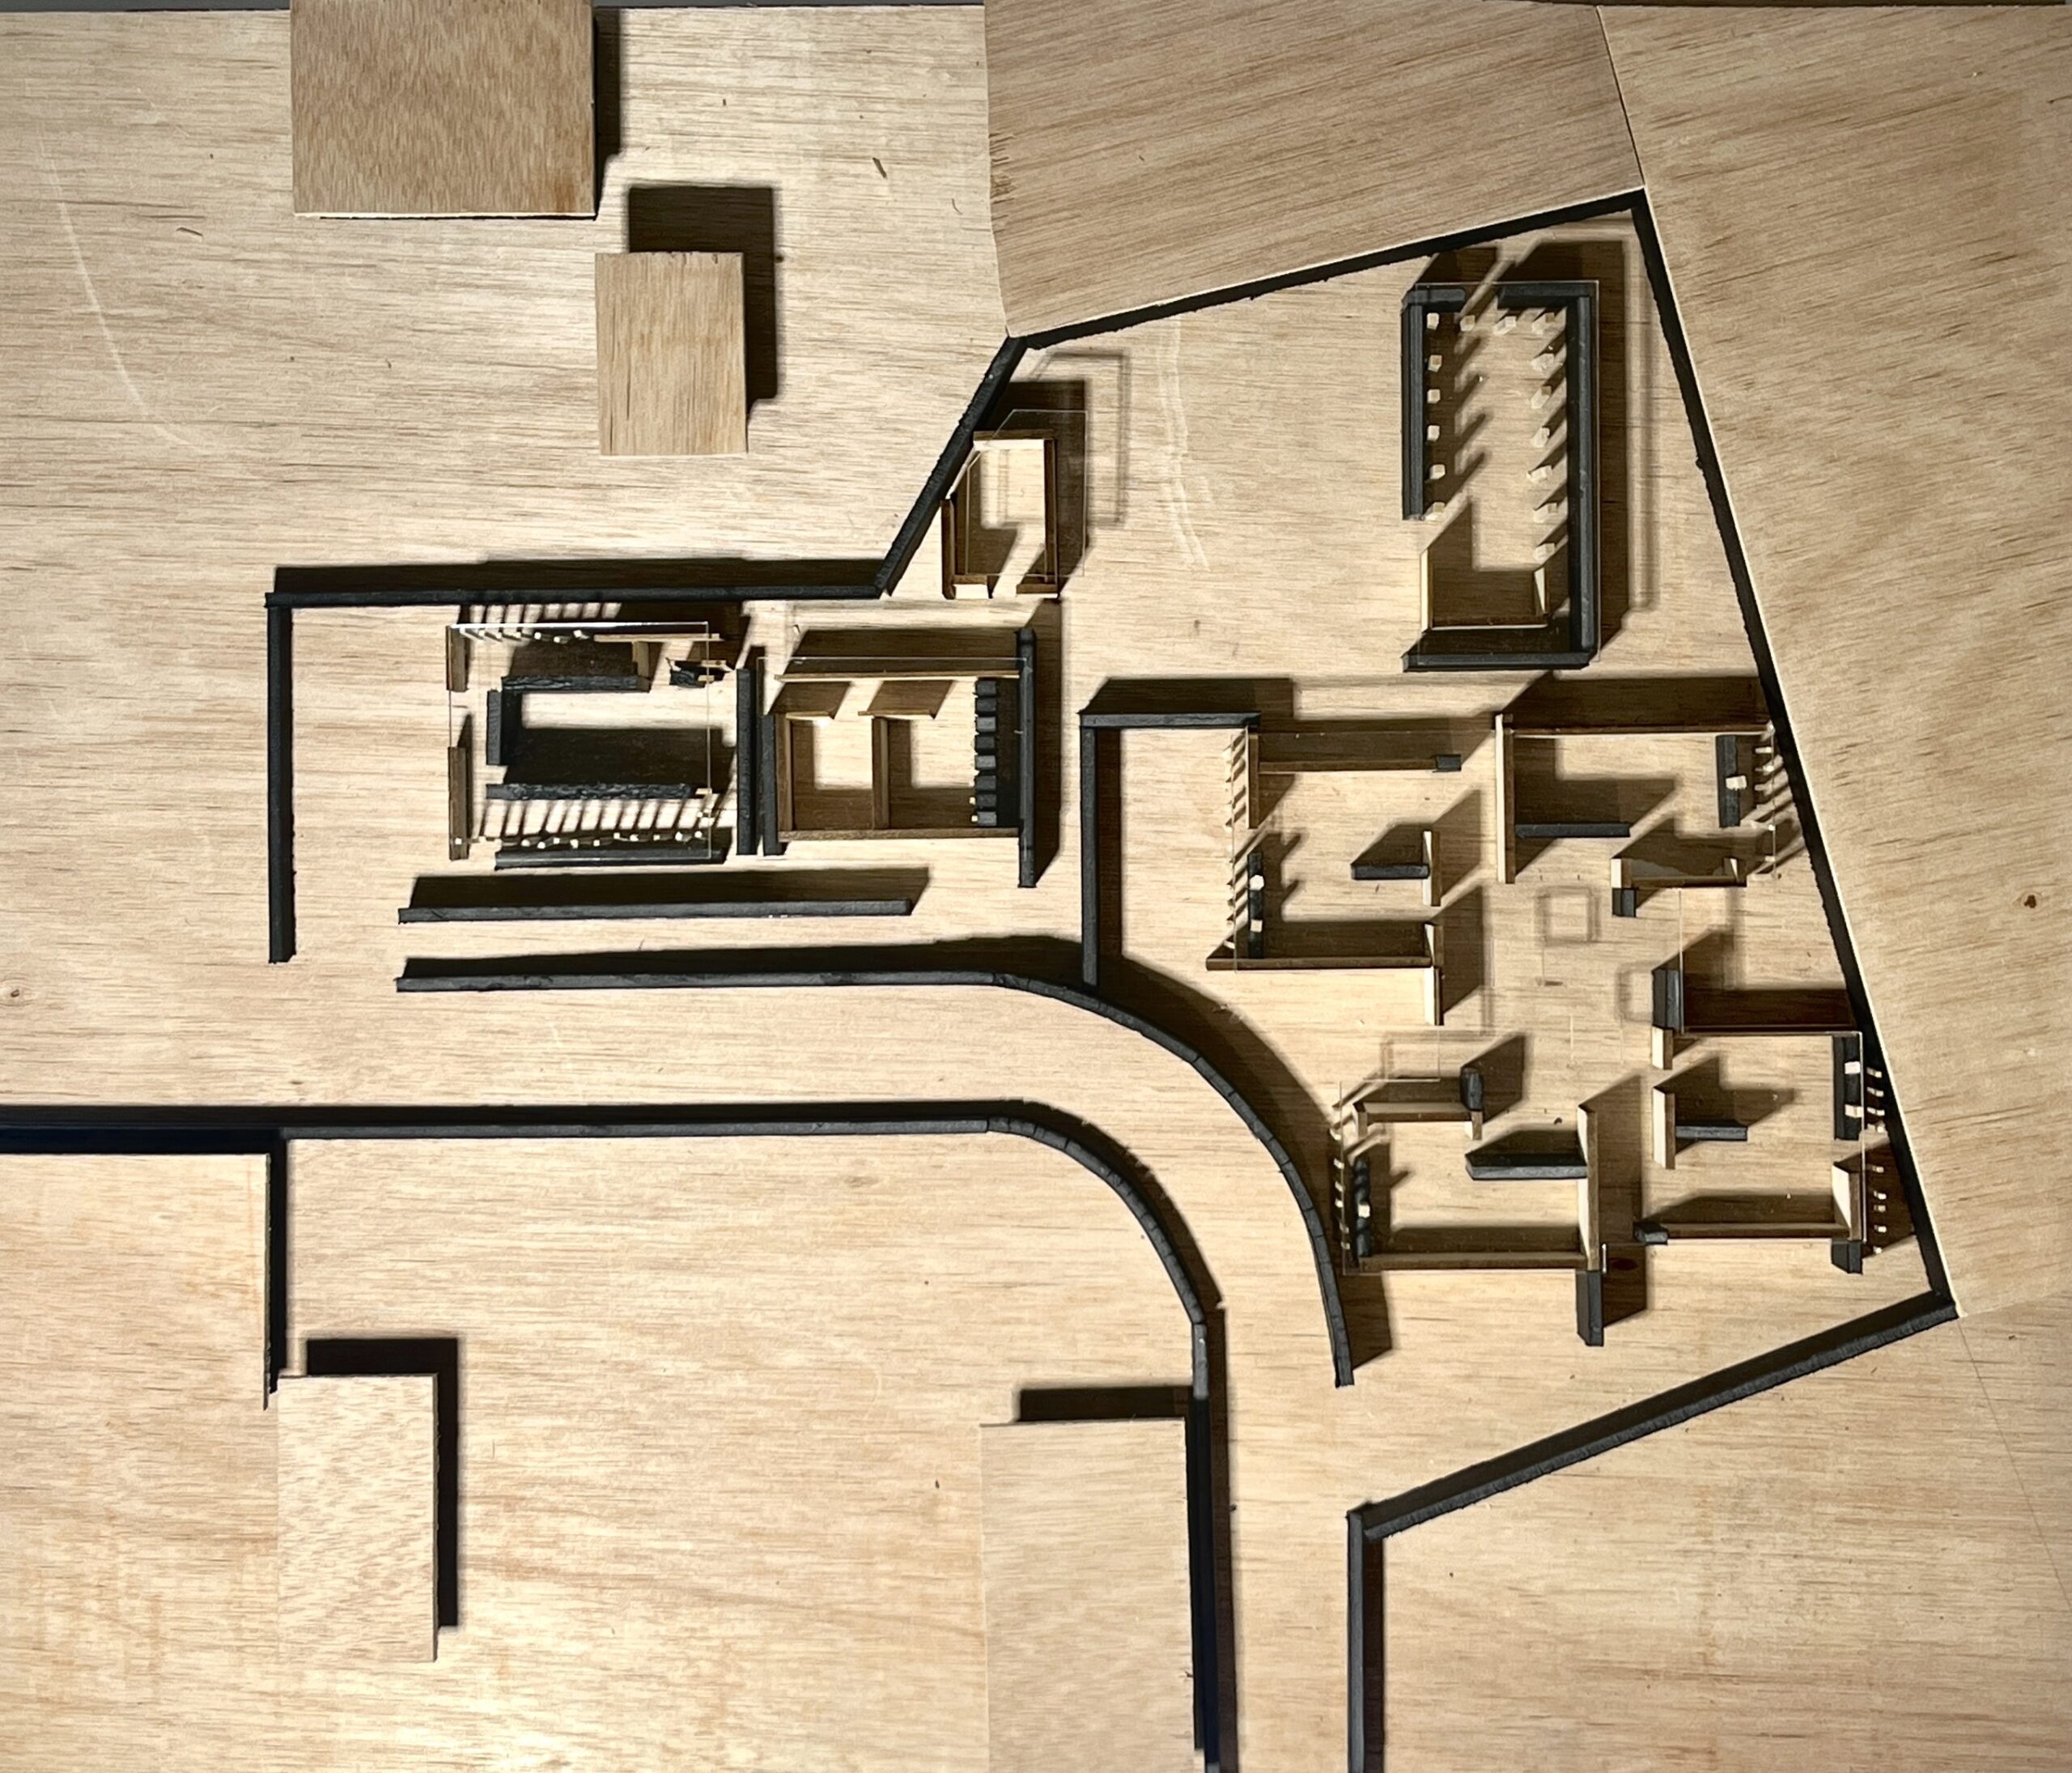 An overhead photography of a three-dimensional model showing the floorplan of a structure